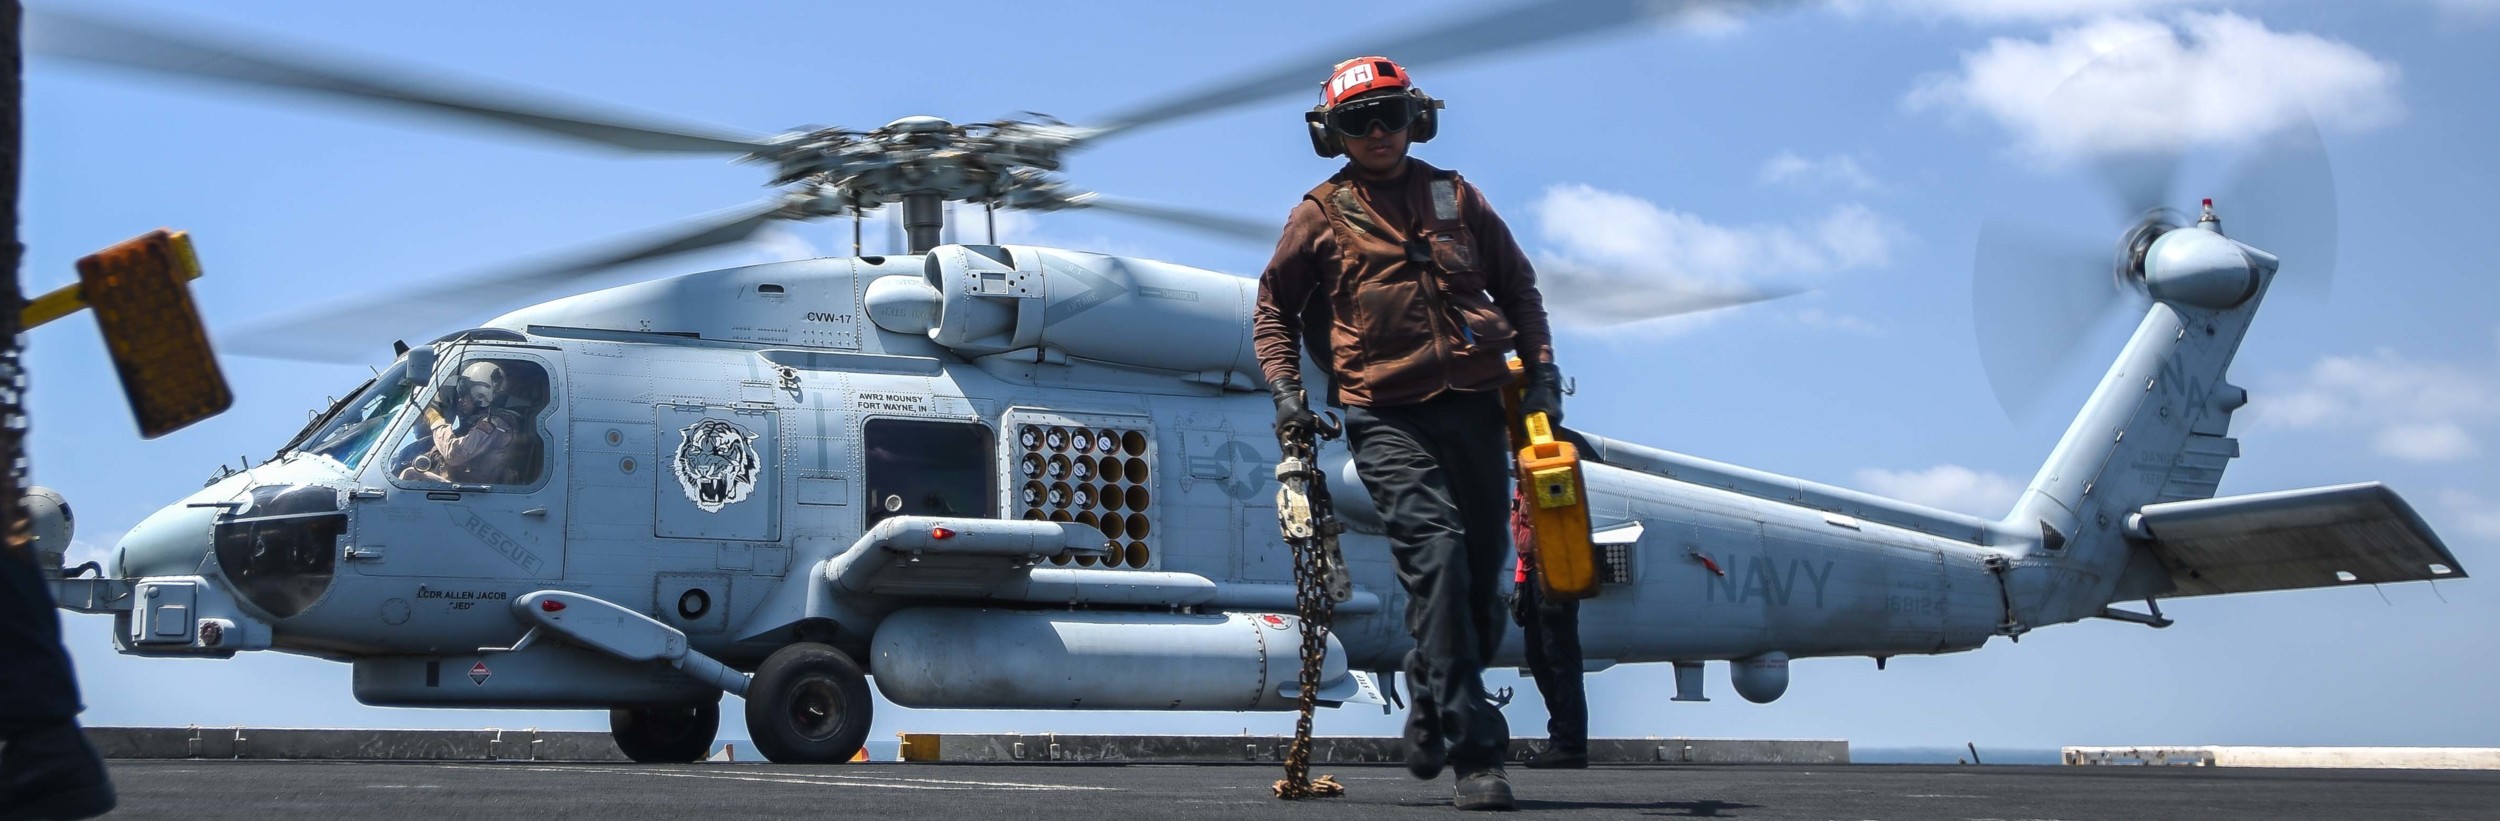 hsm-73 battlecats helicopter maritime strike squadron us navy mh-60r seahawk 2014 27